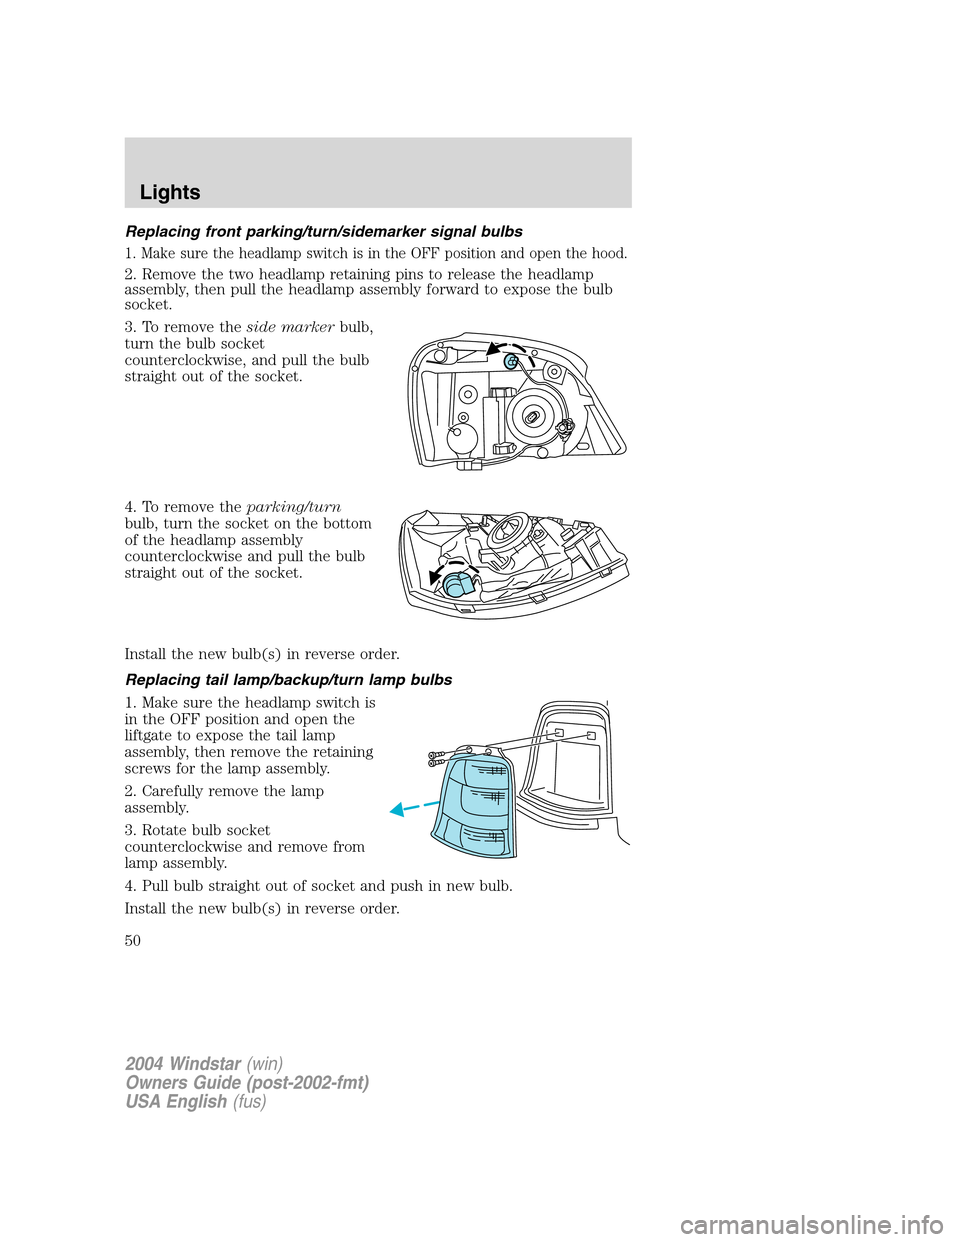 FORD FREESTAR 2004 1.G Owners Manual Replacing front parking/turn/sidemarker signal bulbs
1. Make sure the headlamp switch is in the OFF position and open the hood.
2. Remove the two headlamp retaining pins to release the headlamp
assemb